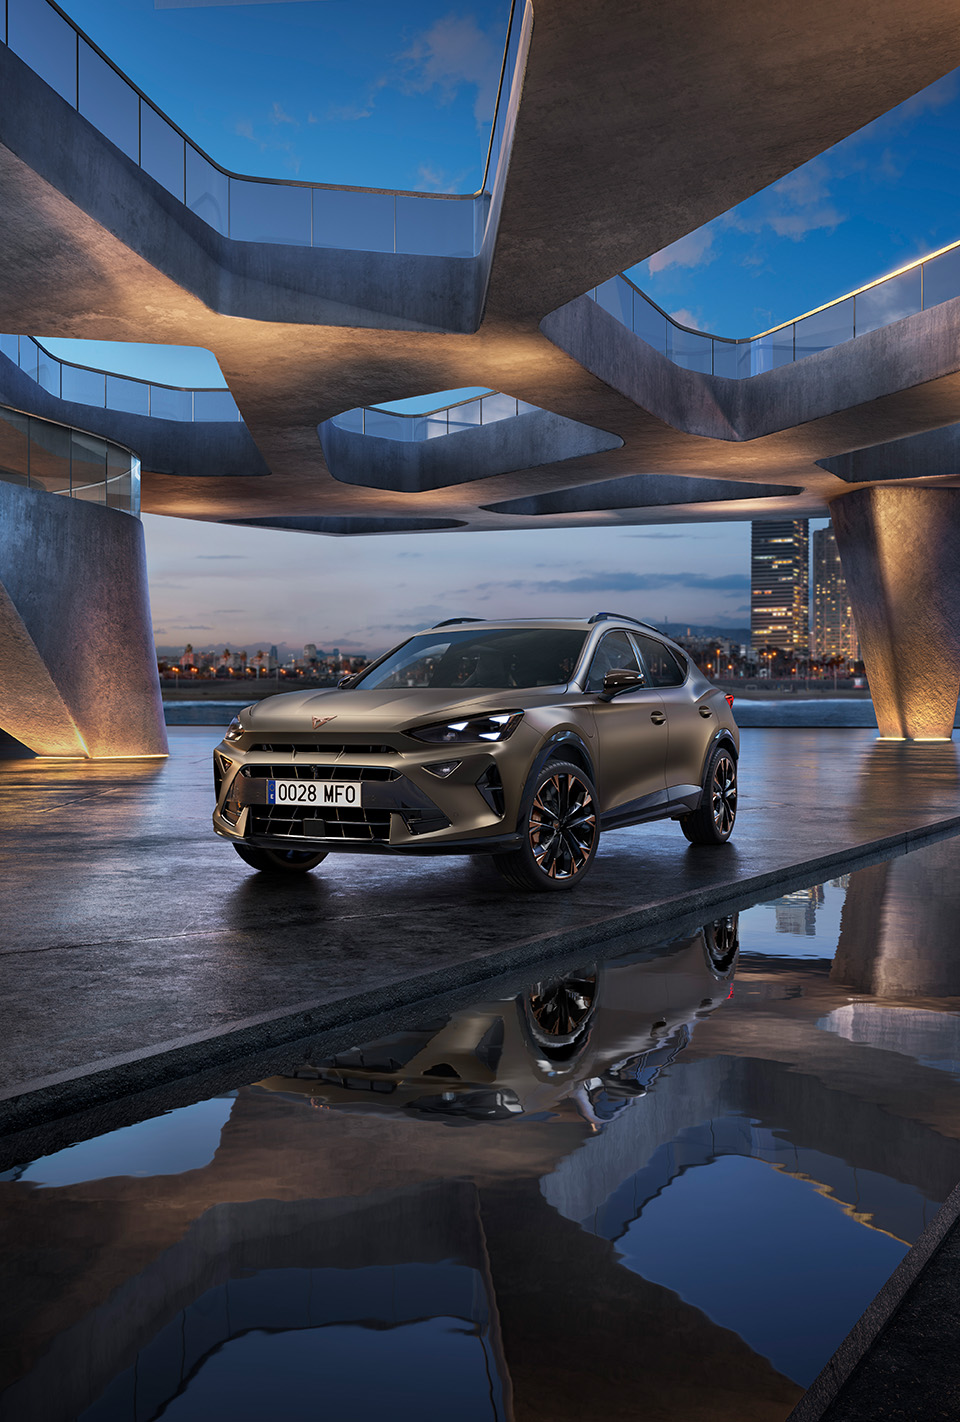 The 2024 Century bronze matte CUPRA Formentor parked on a reflective waterfront promenade. The sporty and aerodynamic new vehicle is positioned centre frame. The setting features futuristic architecture and Barcelona’s glowing city skyline at dusk.